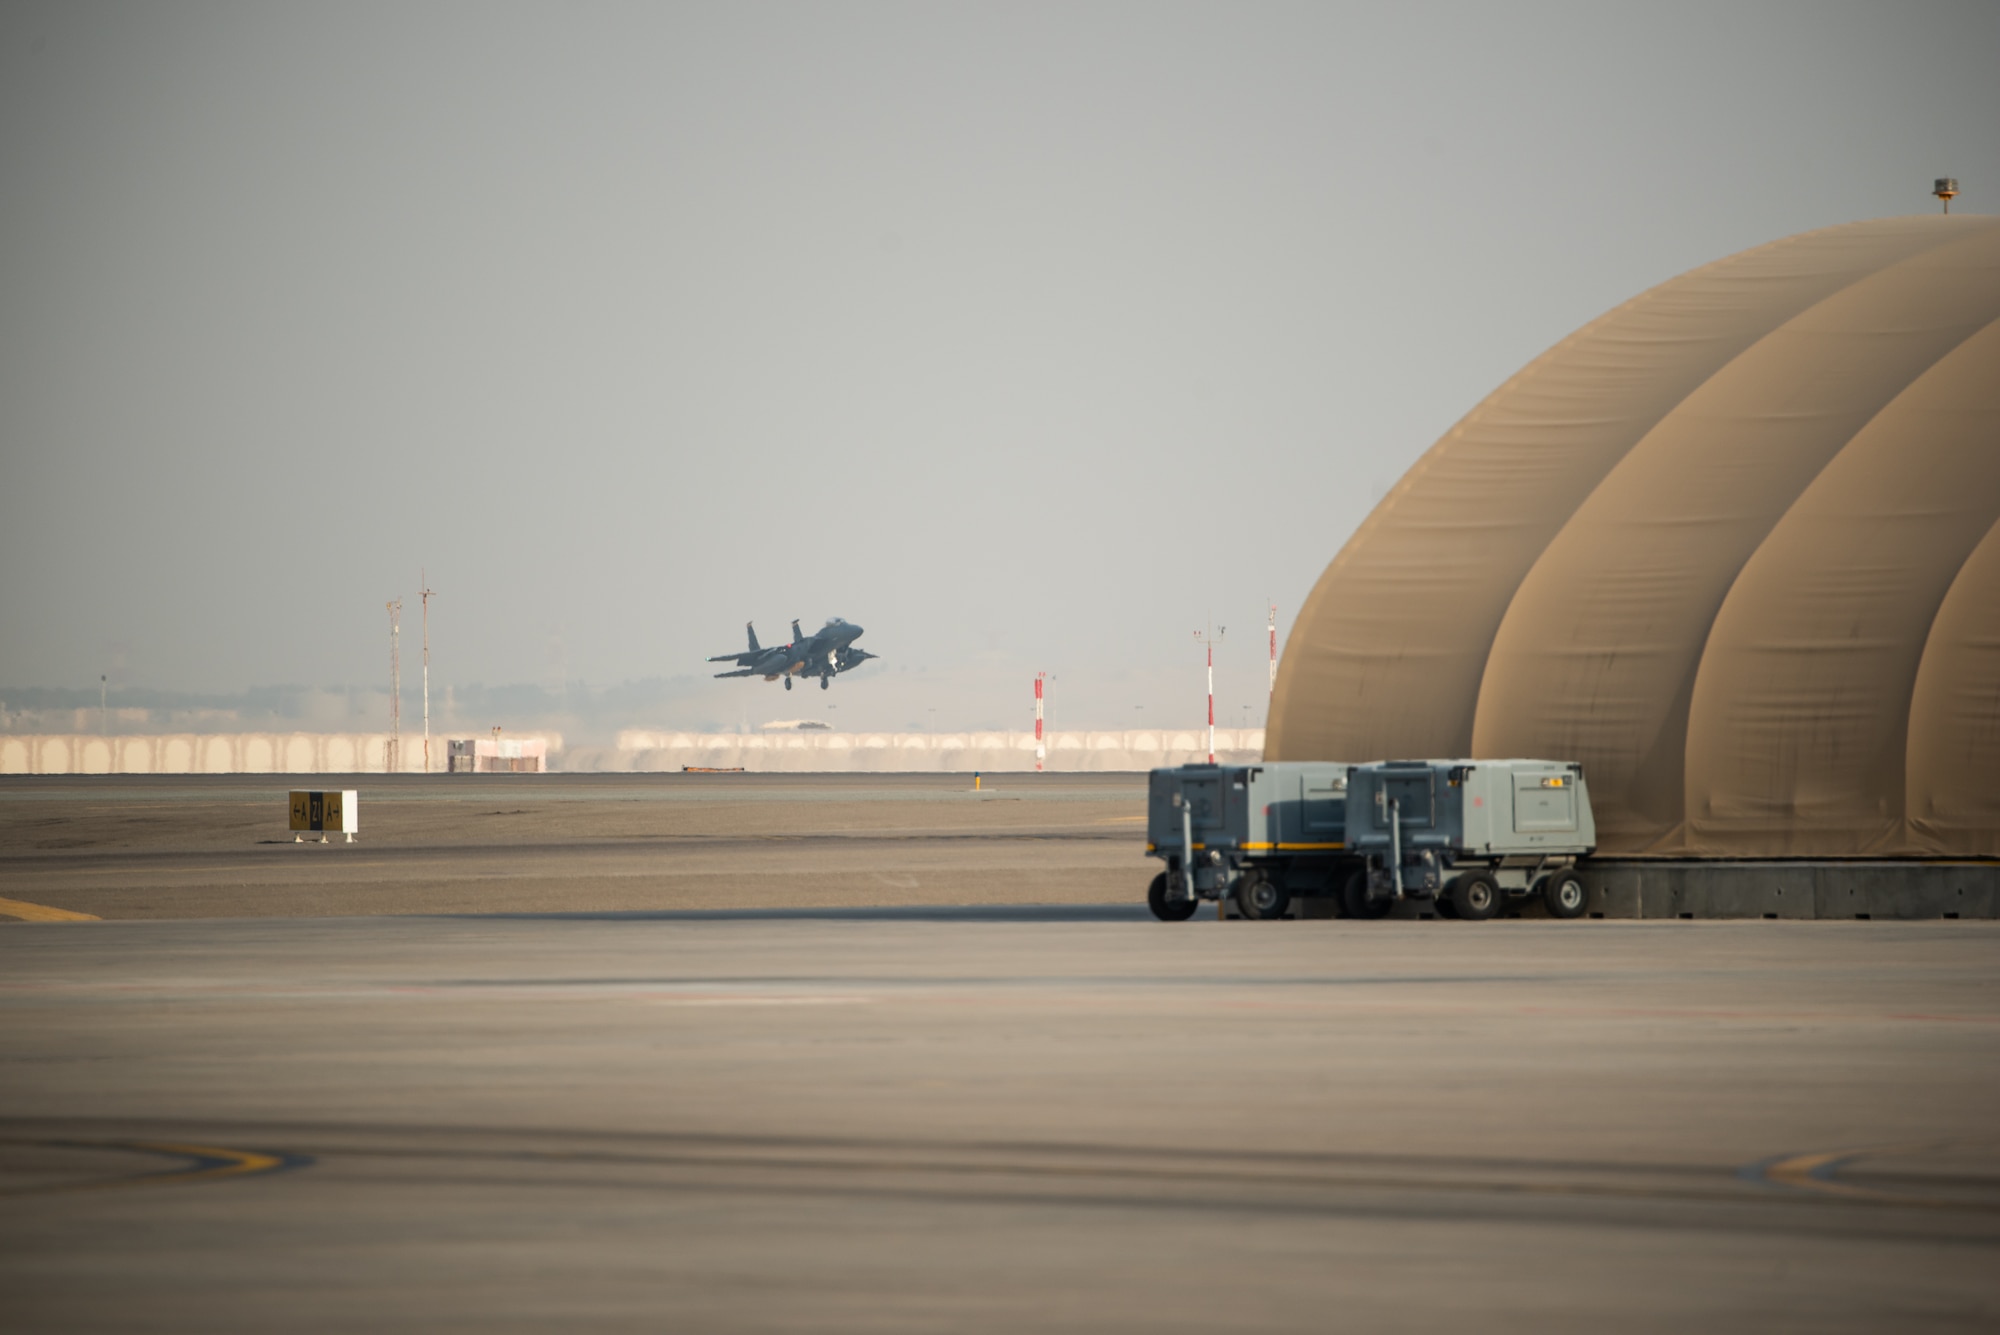 An F-15E Strike Eagle deployed from the 4th Fighter Wing at Seymour Johnson Air Force Base, North Carolina, lands at Al Dhafra Air Base, United Arab Emirates, June 13, 2019. F-15E’s are designed to perform in air-to-air and air-to ground operations in any environment. (U.S. Air Force photo by Staff Sgt. Chris Thornbury)